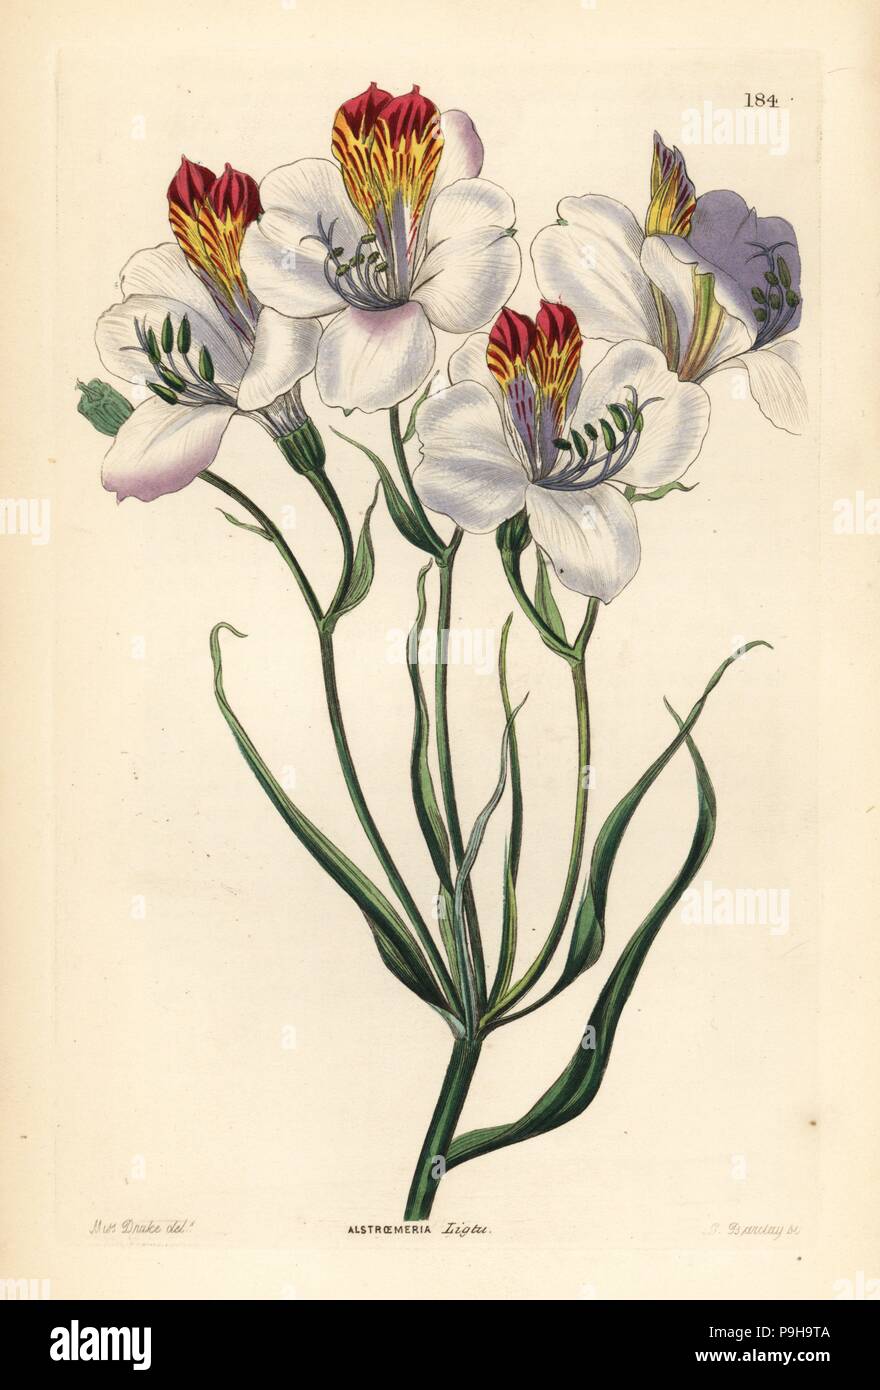 St. Martin's flower or the ligtu, Alstroemeria ligtu. Handcoloured copperplate engraving by G. Barclay after Miss Sarah Drake from John Lindley and Robert Sweet's Ornamental Flower Garden and Shrubbery, G. Willis, London, 1854. Stock Photo